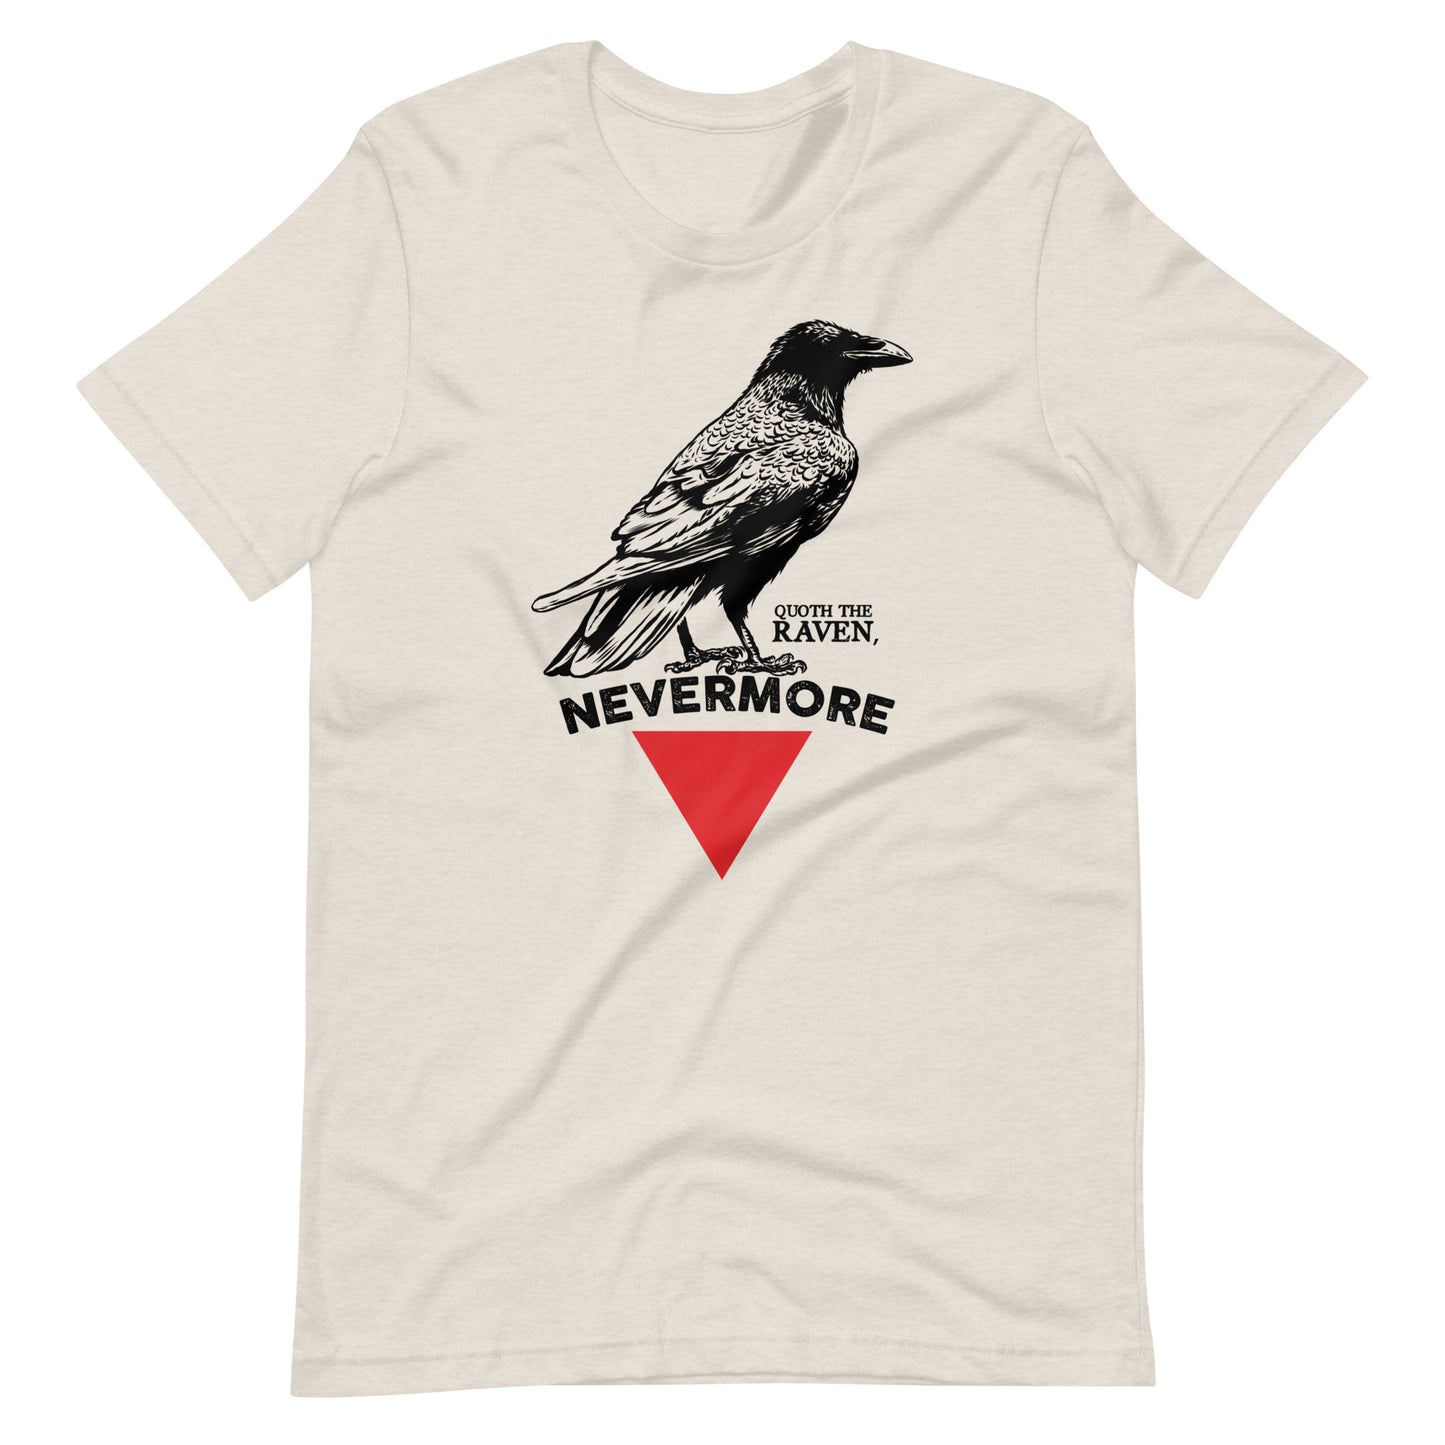 The Raven Nevermore Triangle - Men's t-shirt - Heather Dust Front